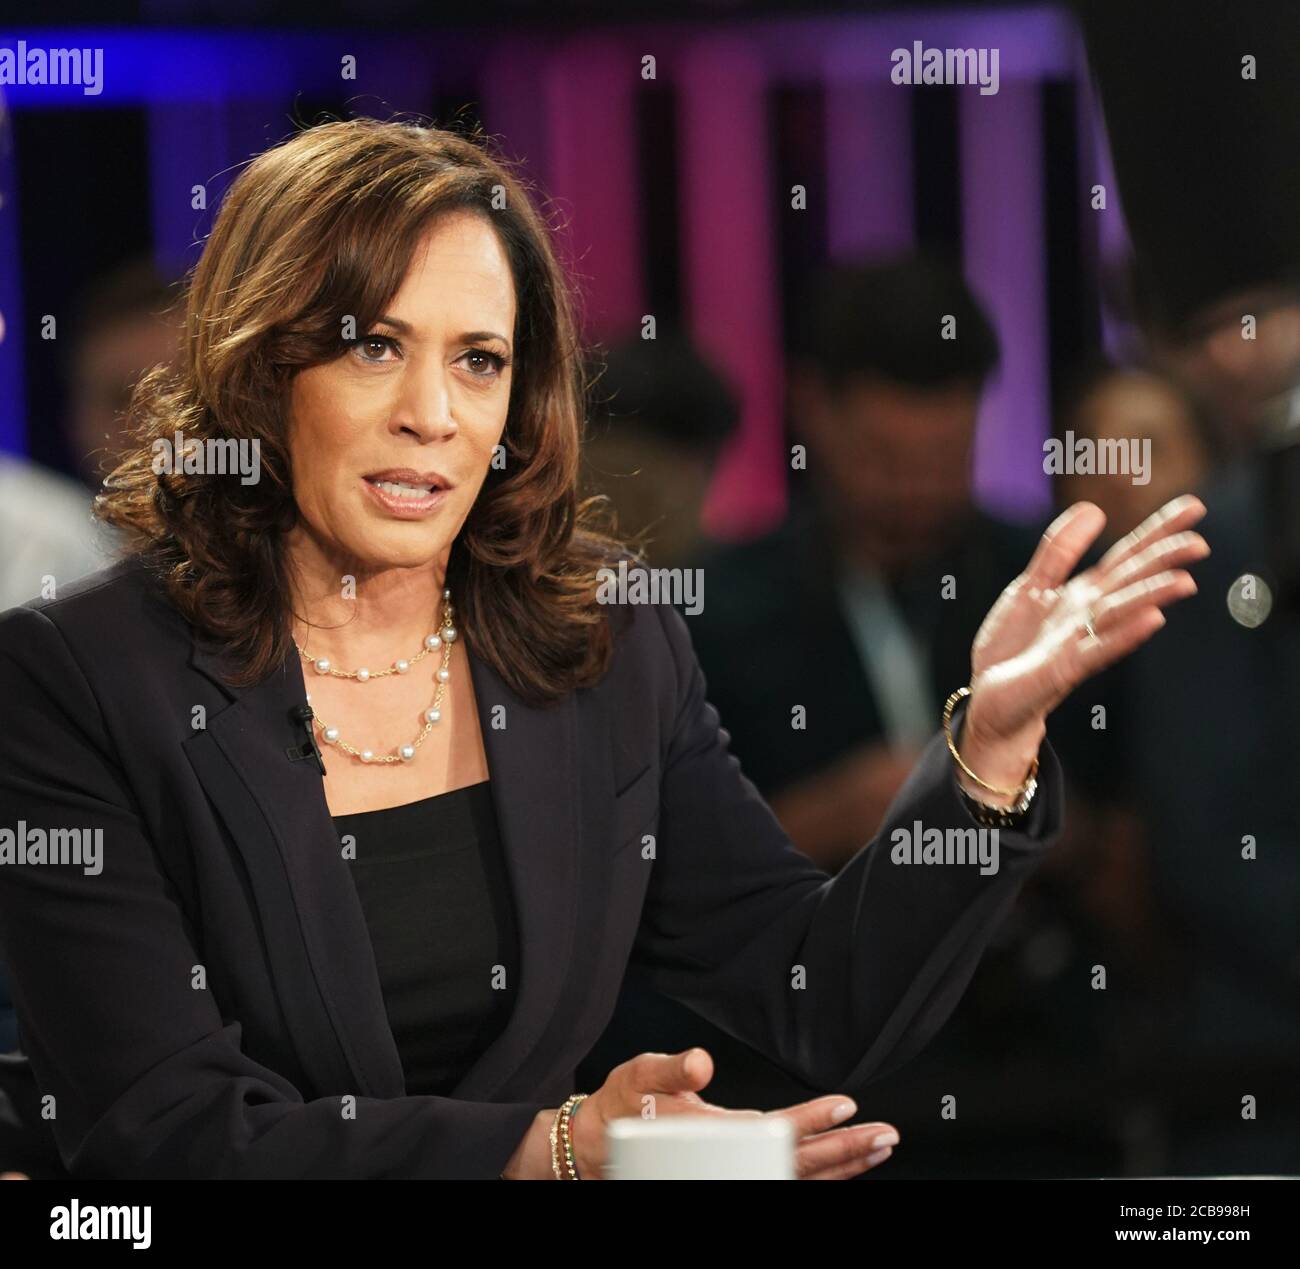 Beijing, China. 11th Aug, 2020. File photo taken on June 27, 2019 shows Senator Kamala Harris of California being interviewed after the second night of the first Democratic primary debate in Miami, Florida, the United States. Former U.S. Vice President and presumptive Democratic nominee Joe Biden announced on Aug. 11, 2020 that he has picked Senator Kamala Harris of California as his running mate. Credit: Liu Jie/Xinhua/Alamy Live News Stock Photo